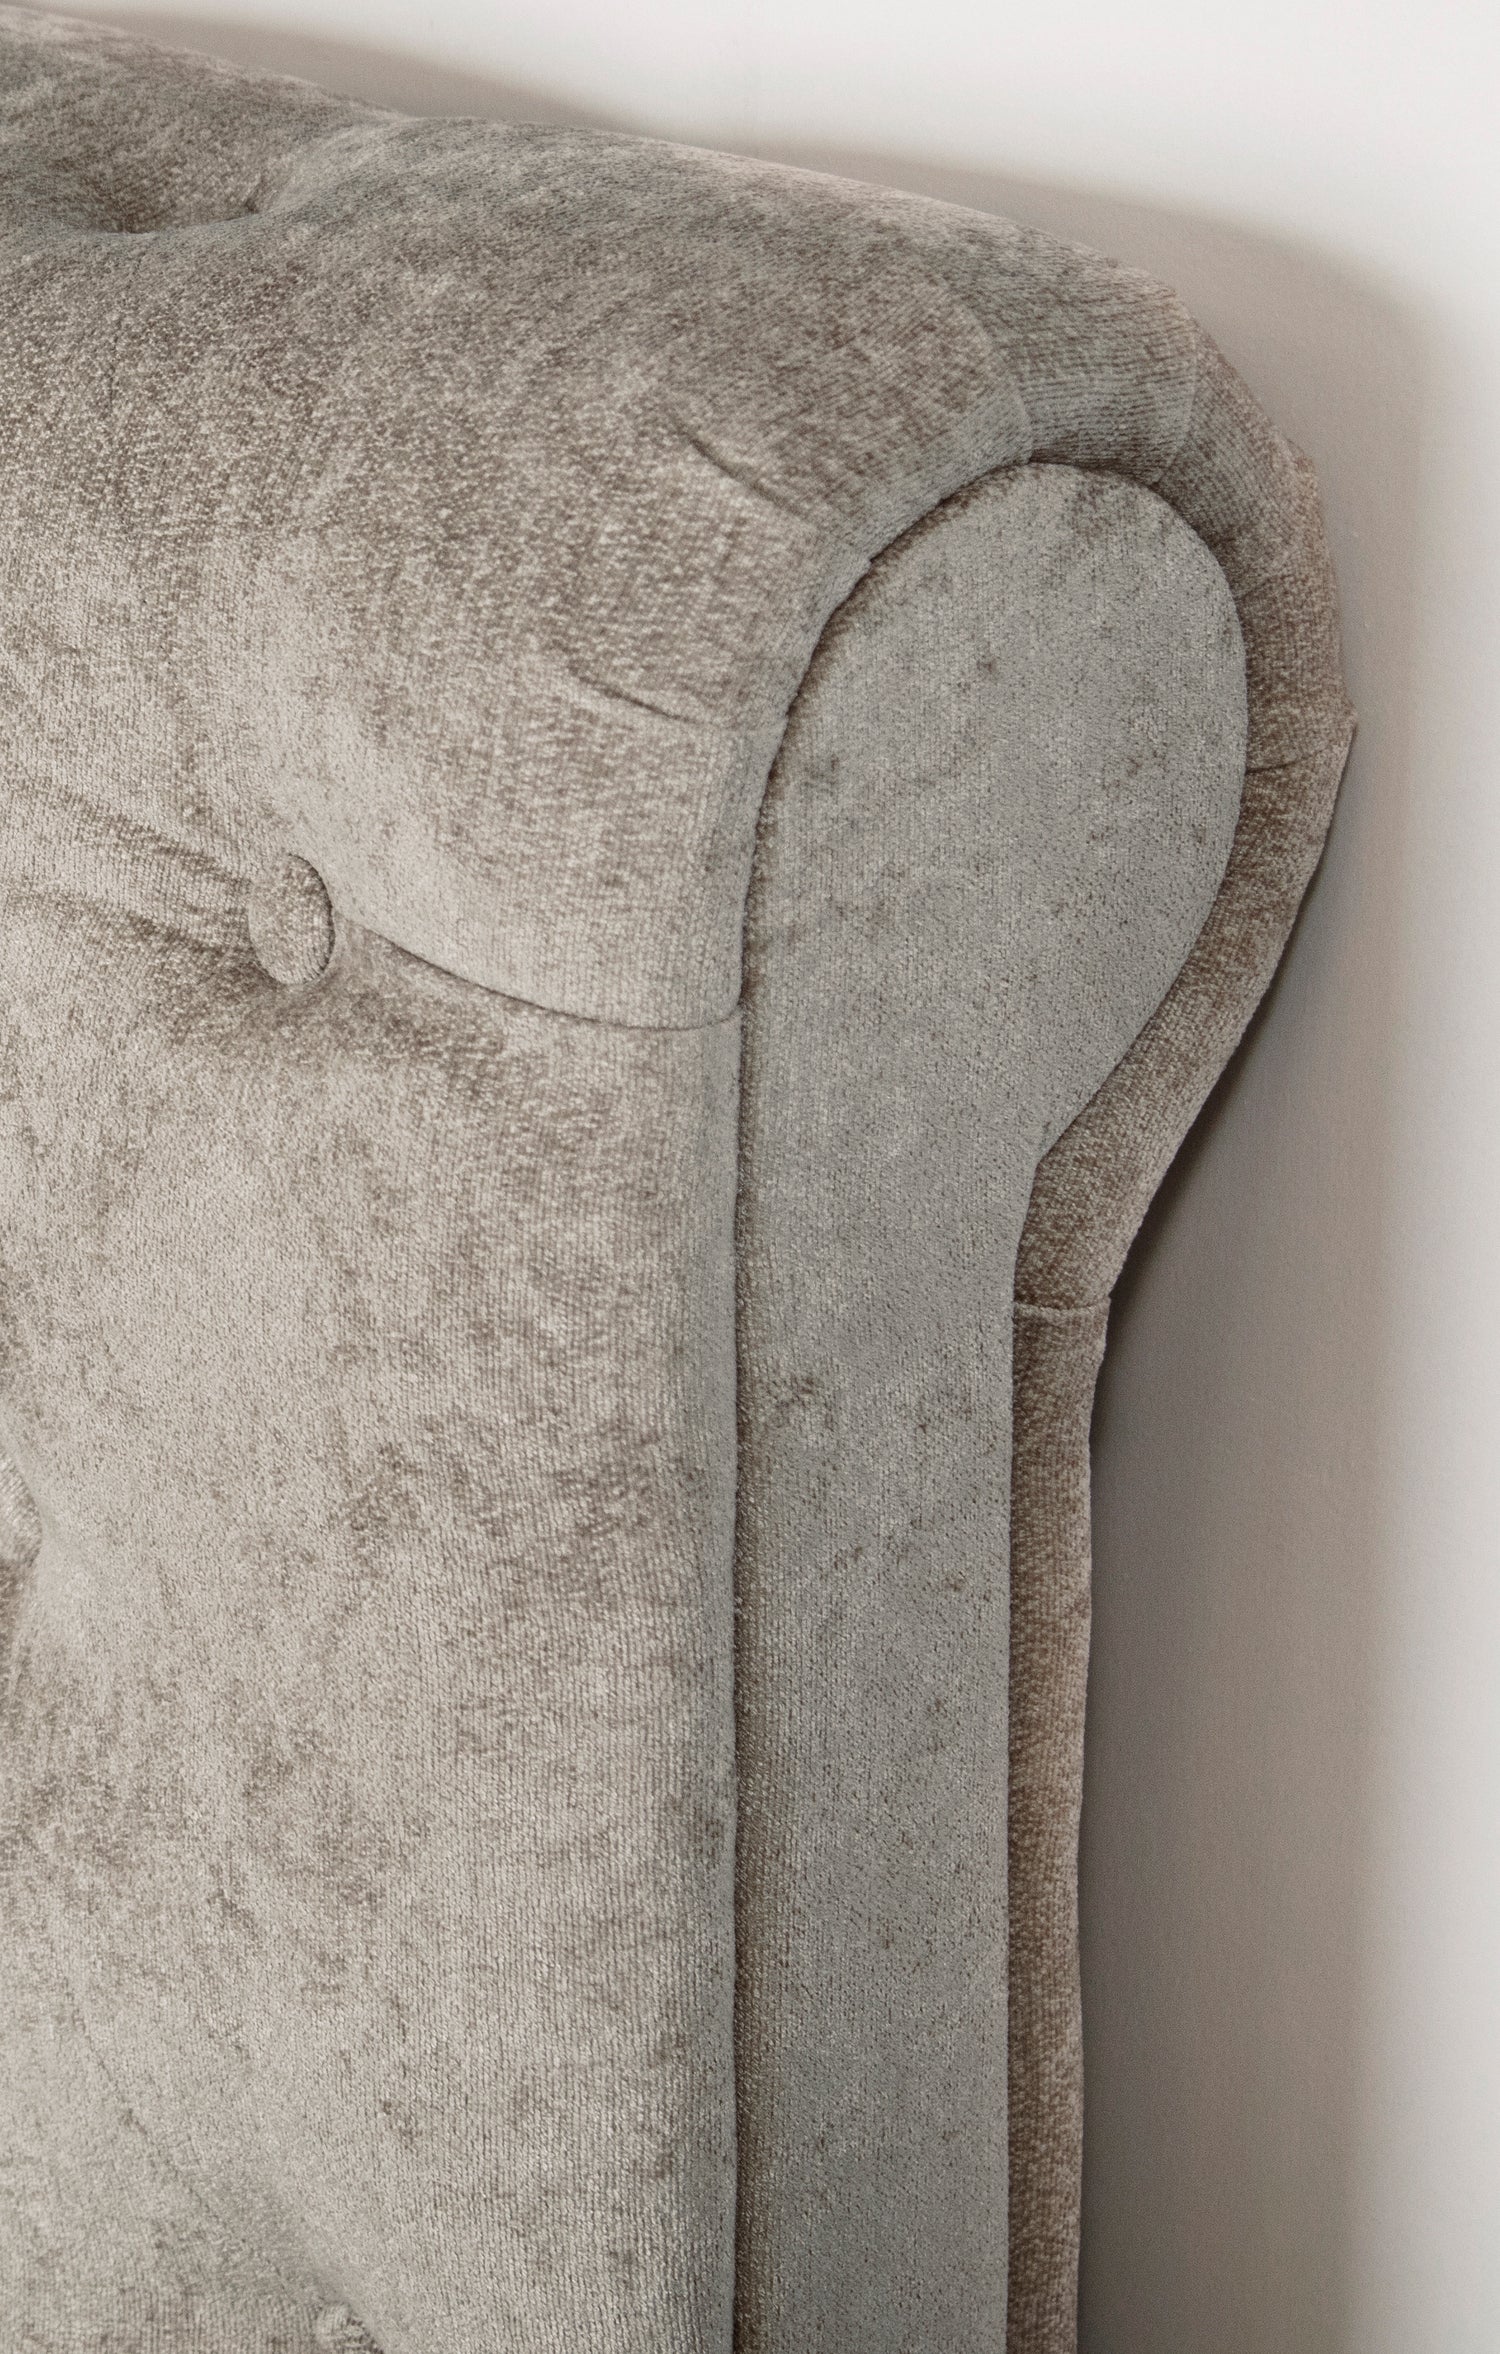 Emporia Beds Balmoral Scroll Ottoman Bed Stone Chenille Close Up-Better Bed Company